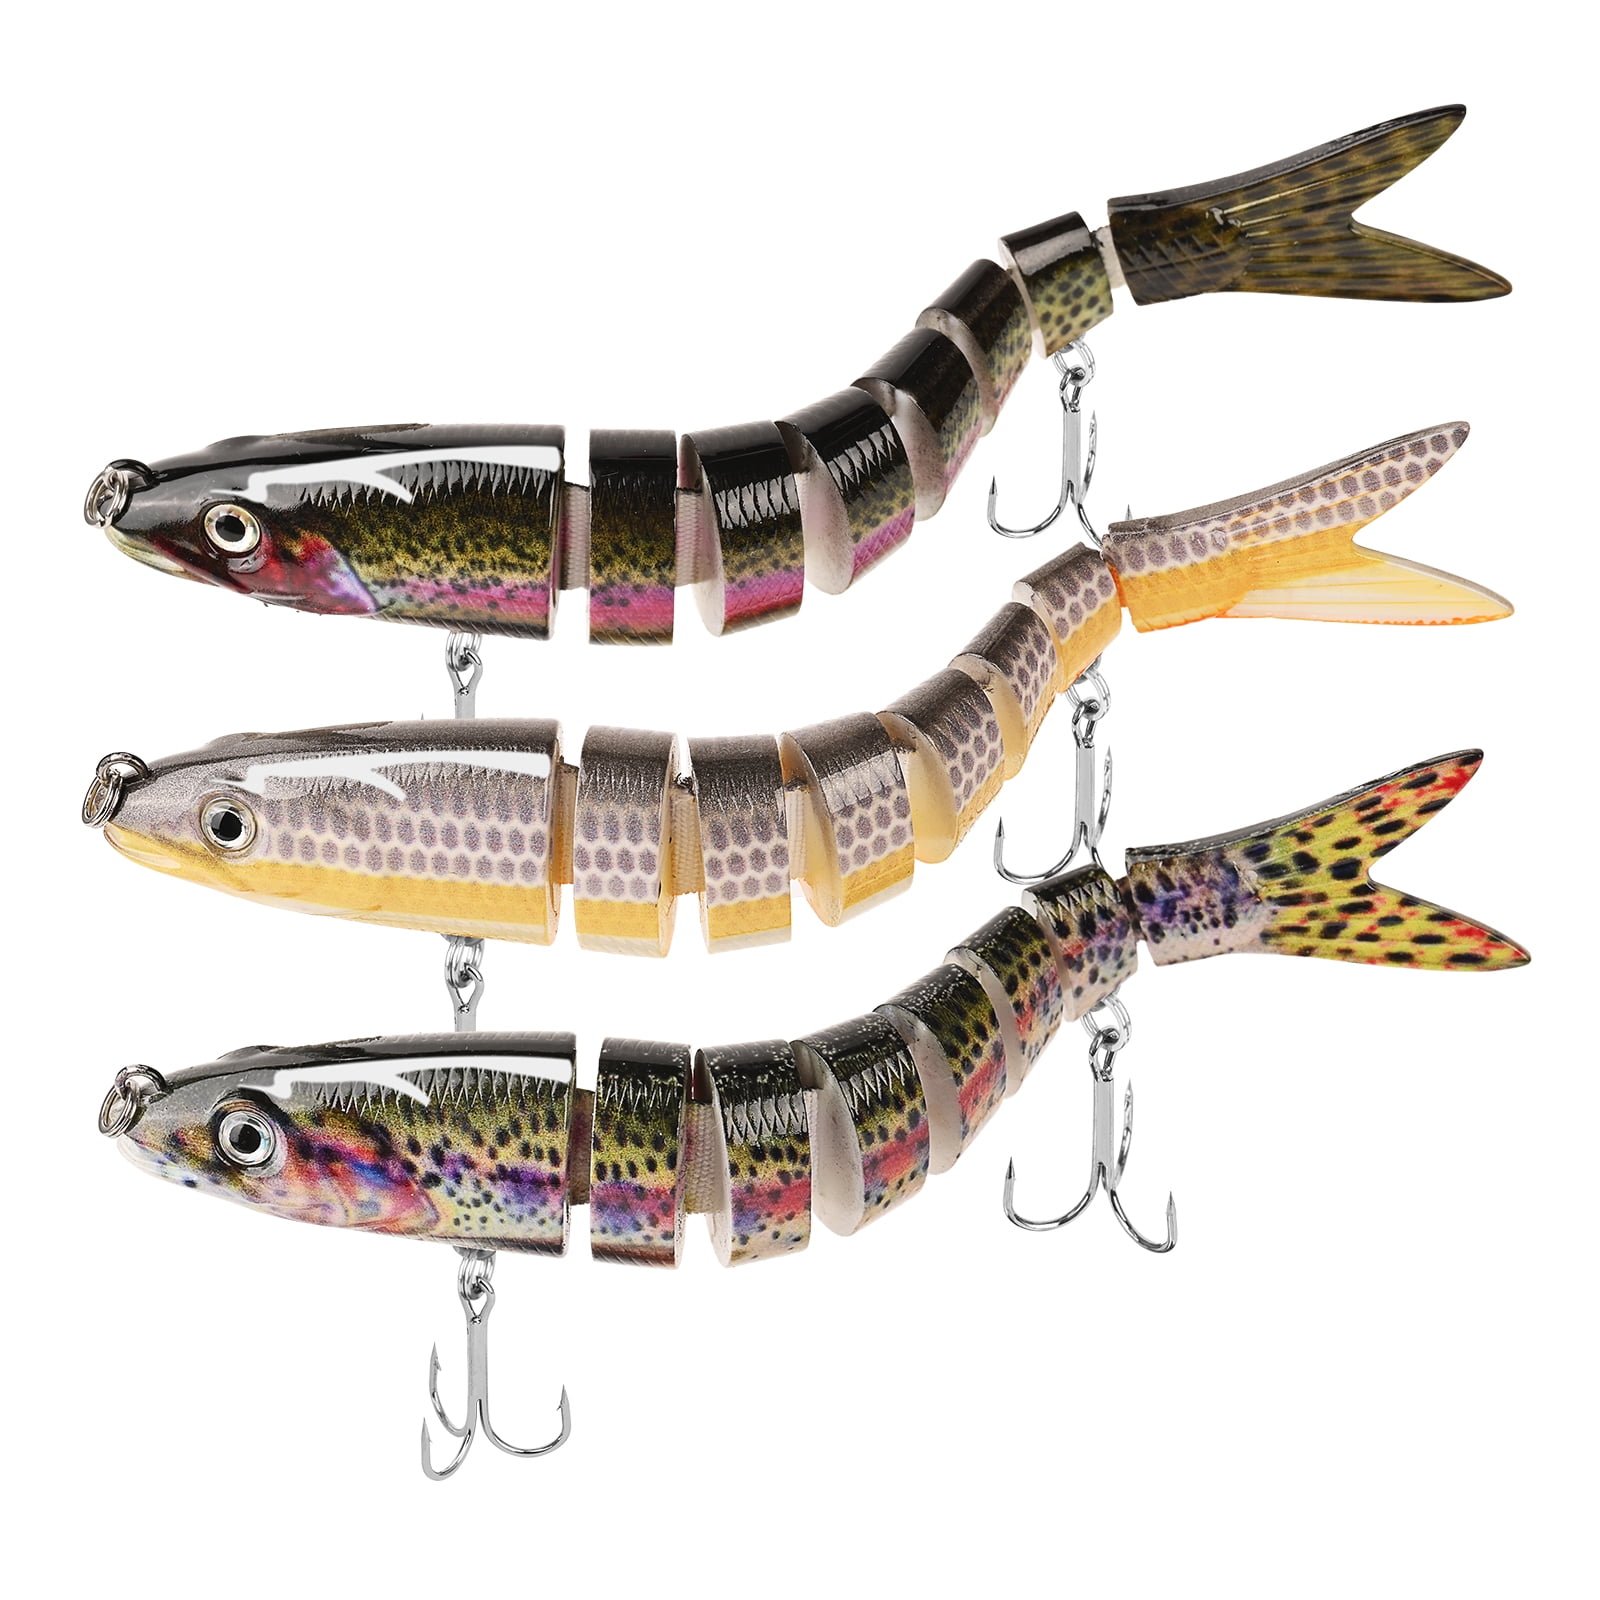 Crow Peak Fishing PB Slider 7 Glide Bait, Jointed Swimbait Lure for  Fishing Big Bass, Pike, and Musky (Rainbow Trout), Baits & Scents -   Canada